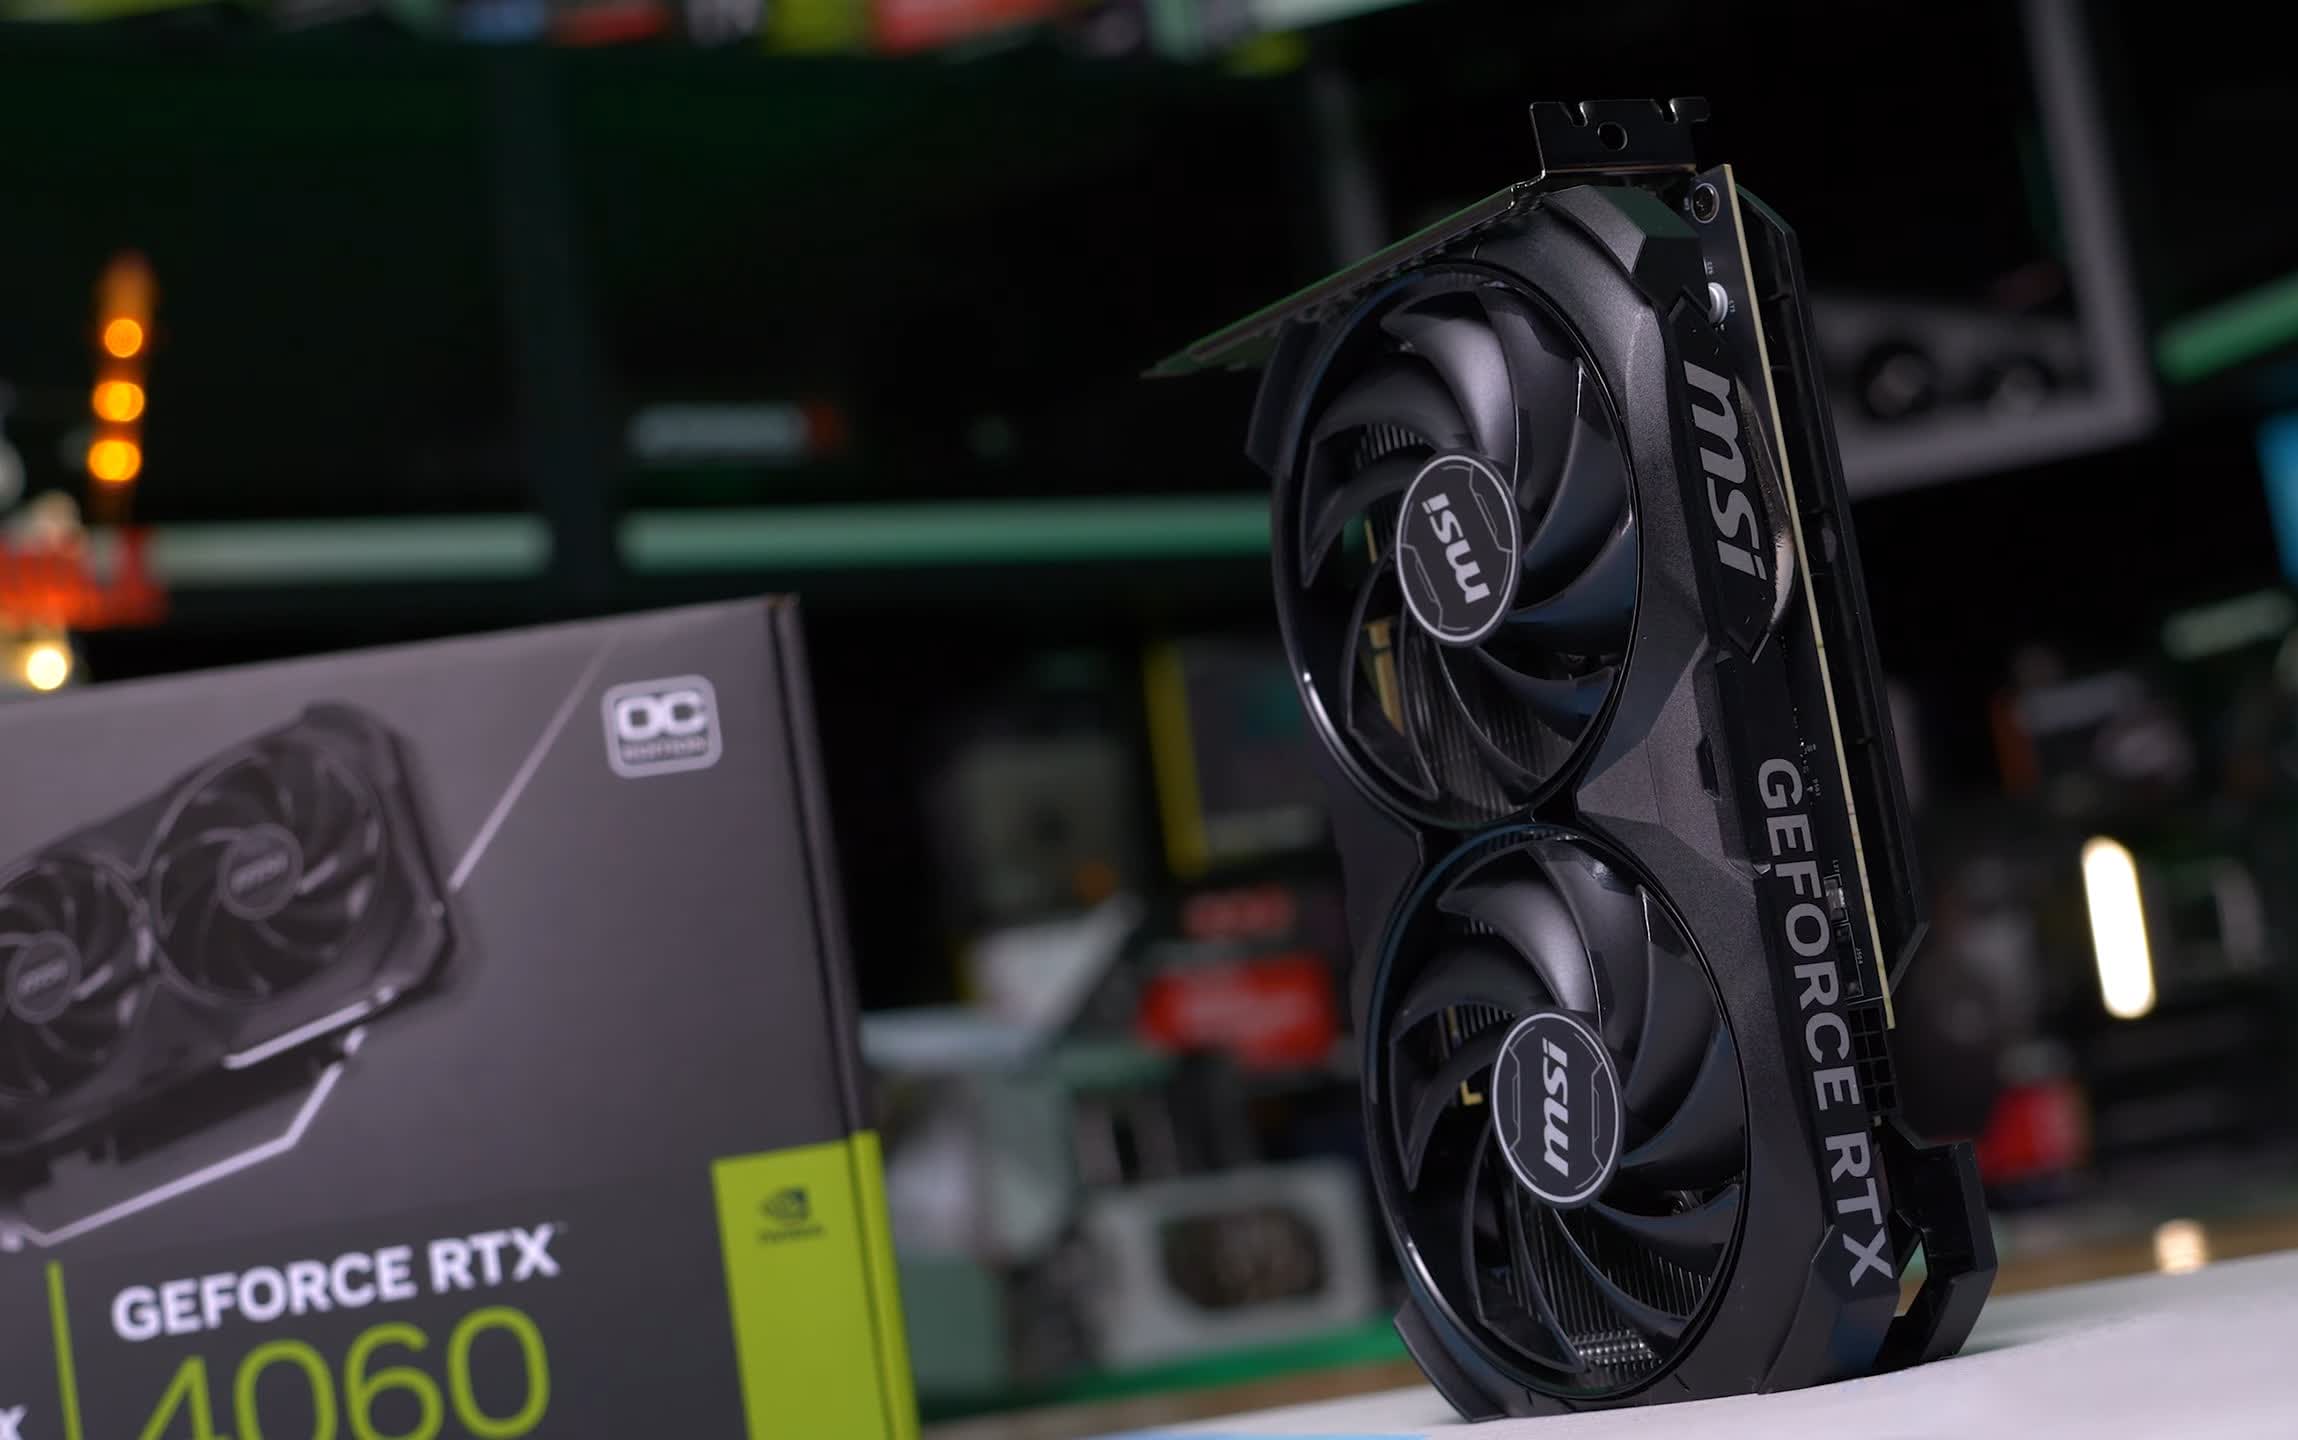 Nvidia RTX 4060's price drops in Europe following poor reception - US market may follow